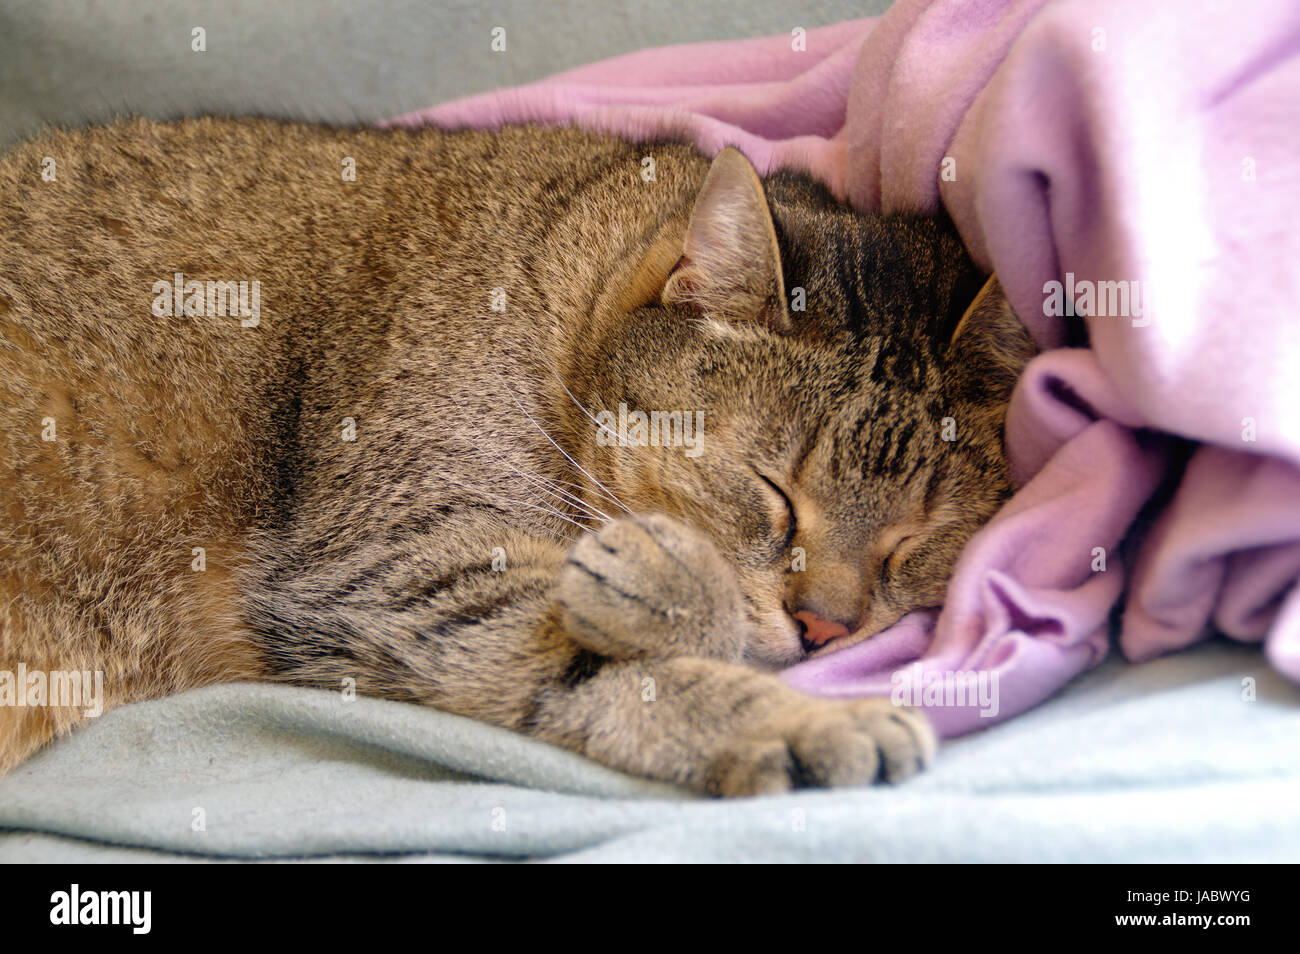 Gold gray cat sleeping on pink and blue coverlet Stock Photo